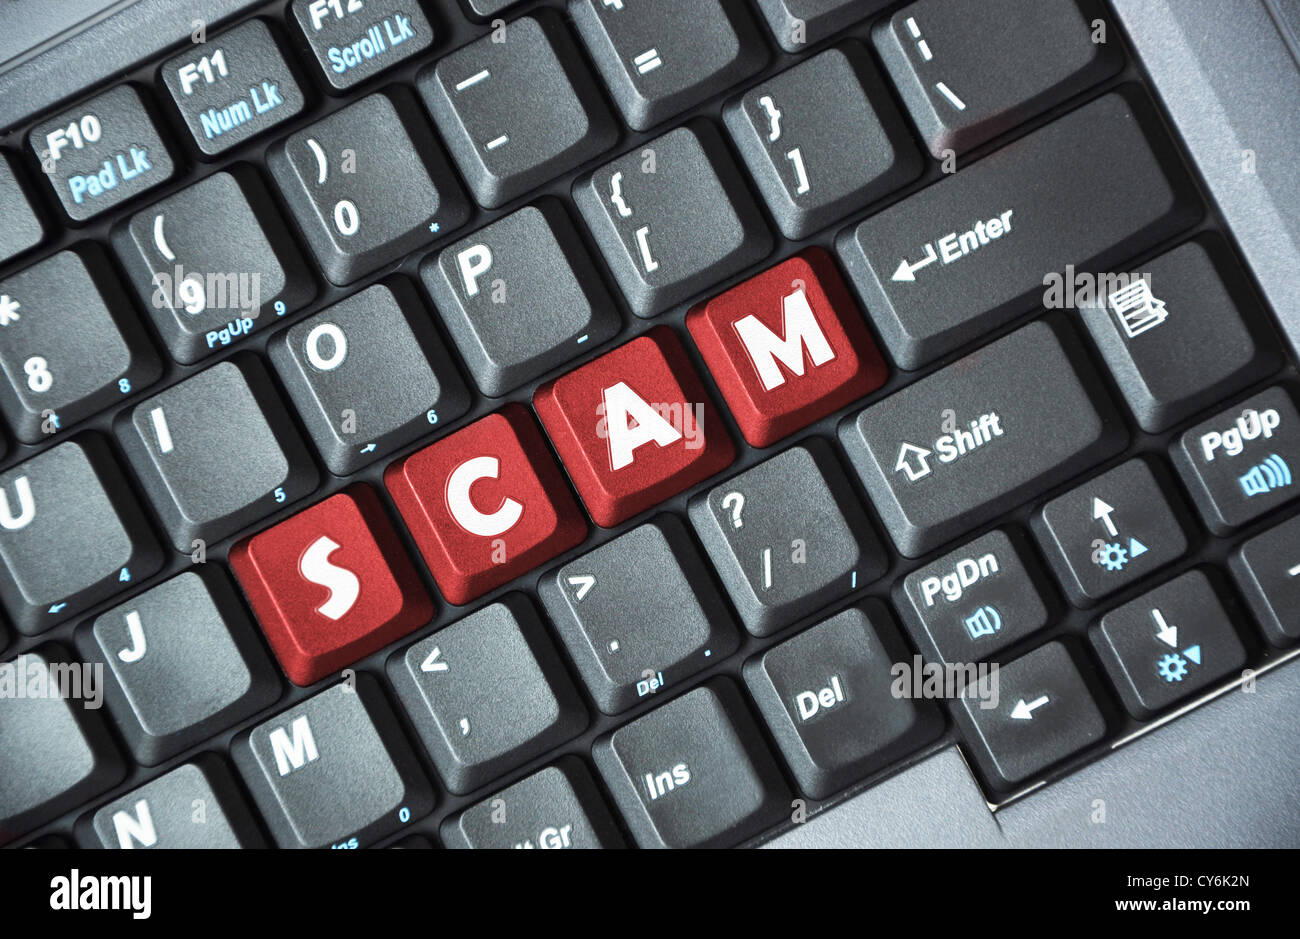 Scam on keyboard Stock Photo